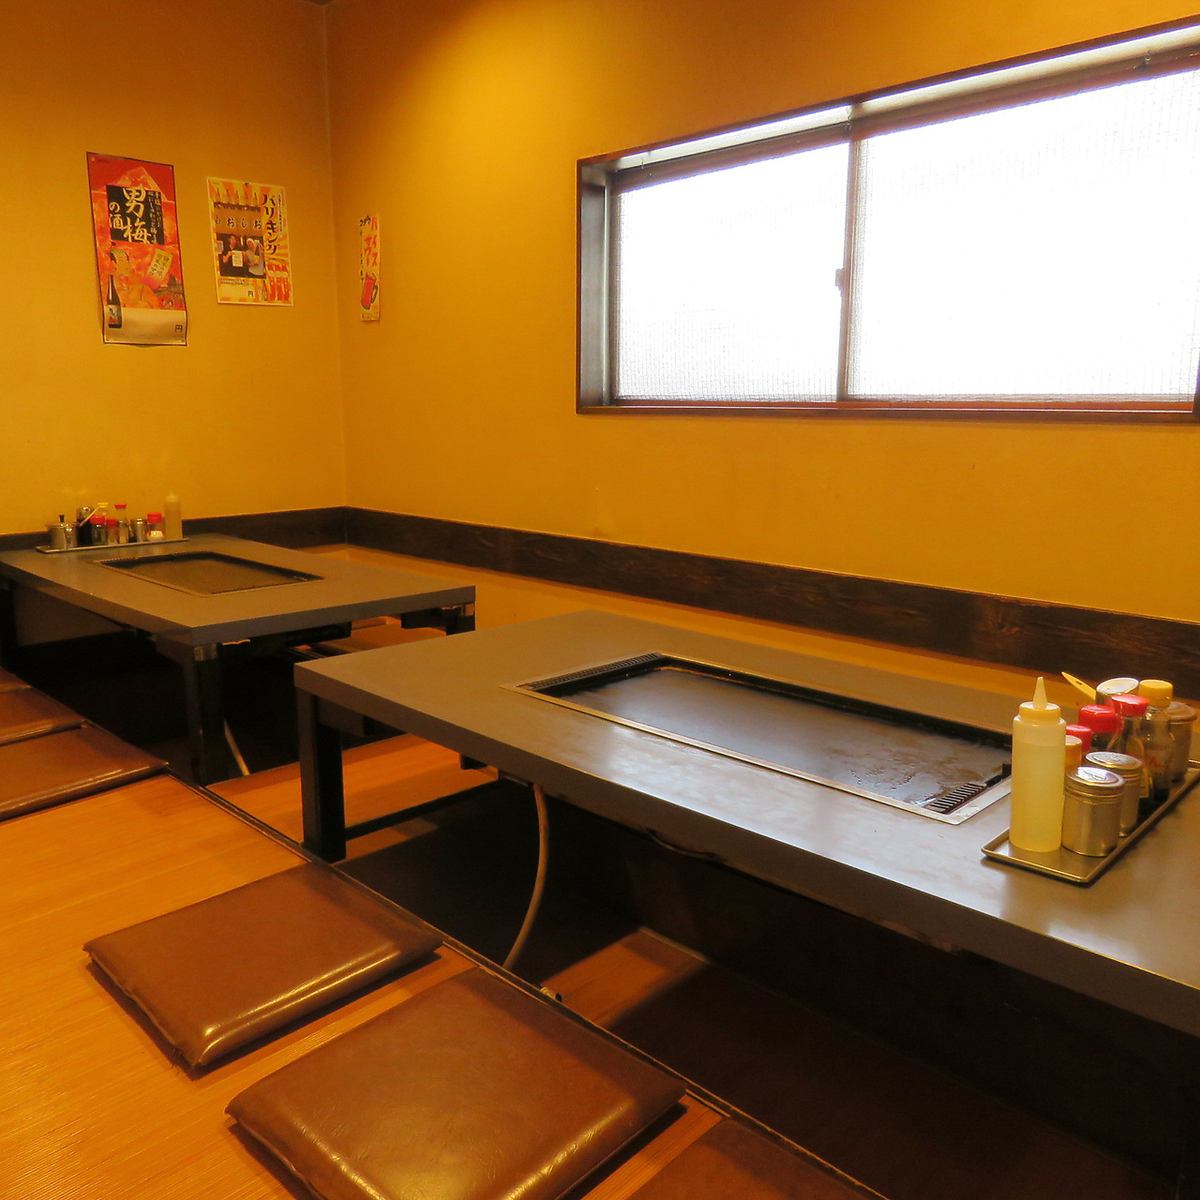 There are not only table seats, but also sunken kotatsu seats!!